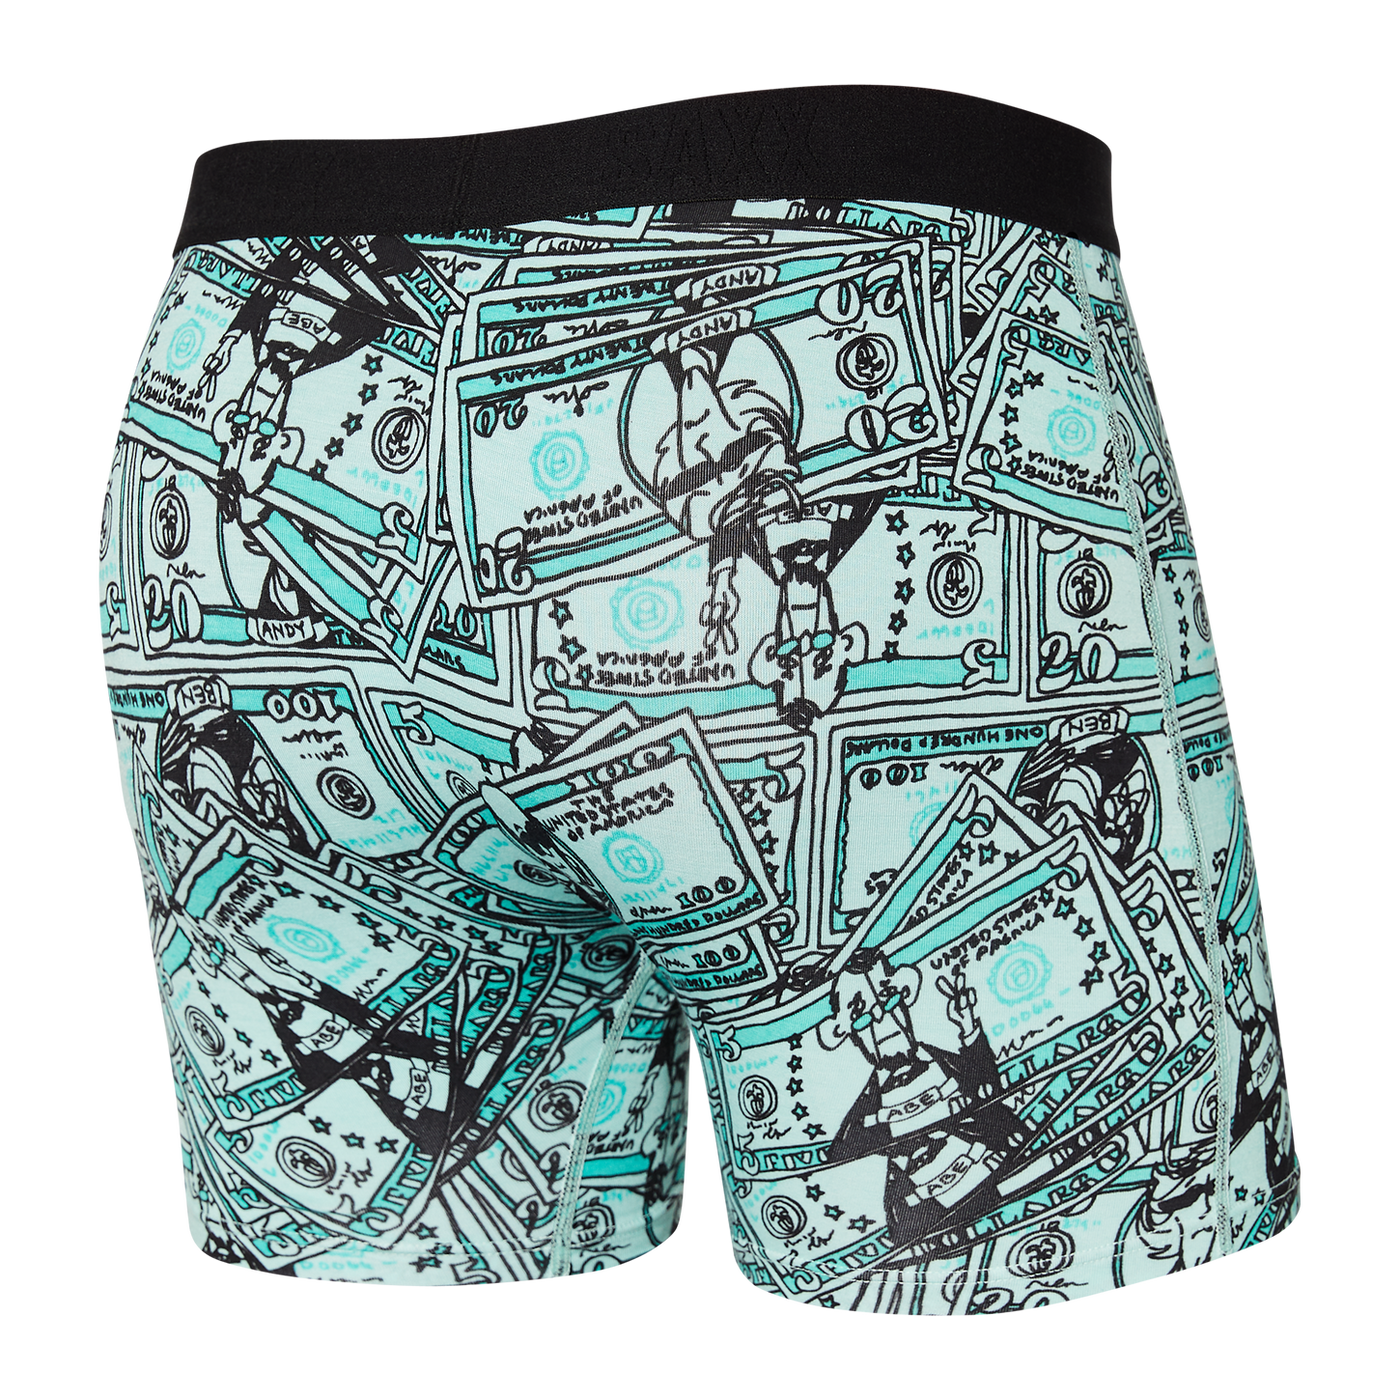 Vibe Boxer Brief - Cold Hard Cash- Ice Green